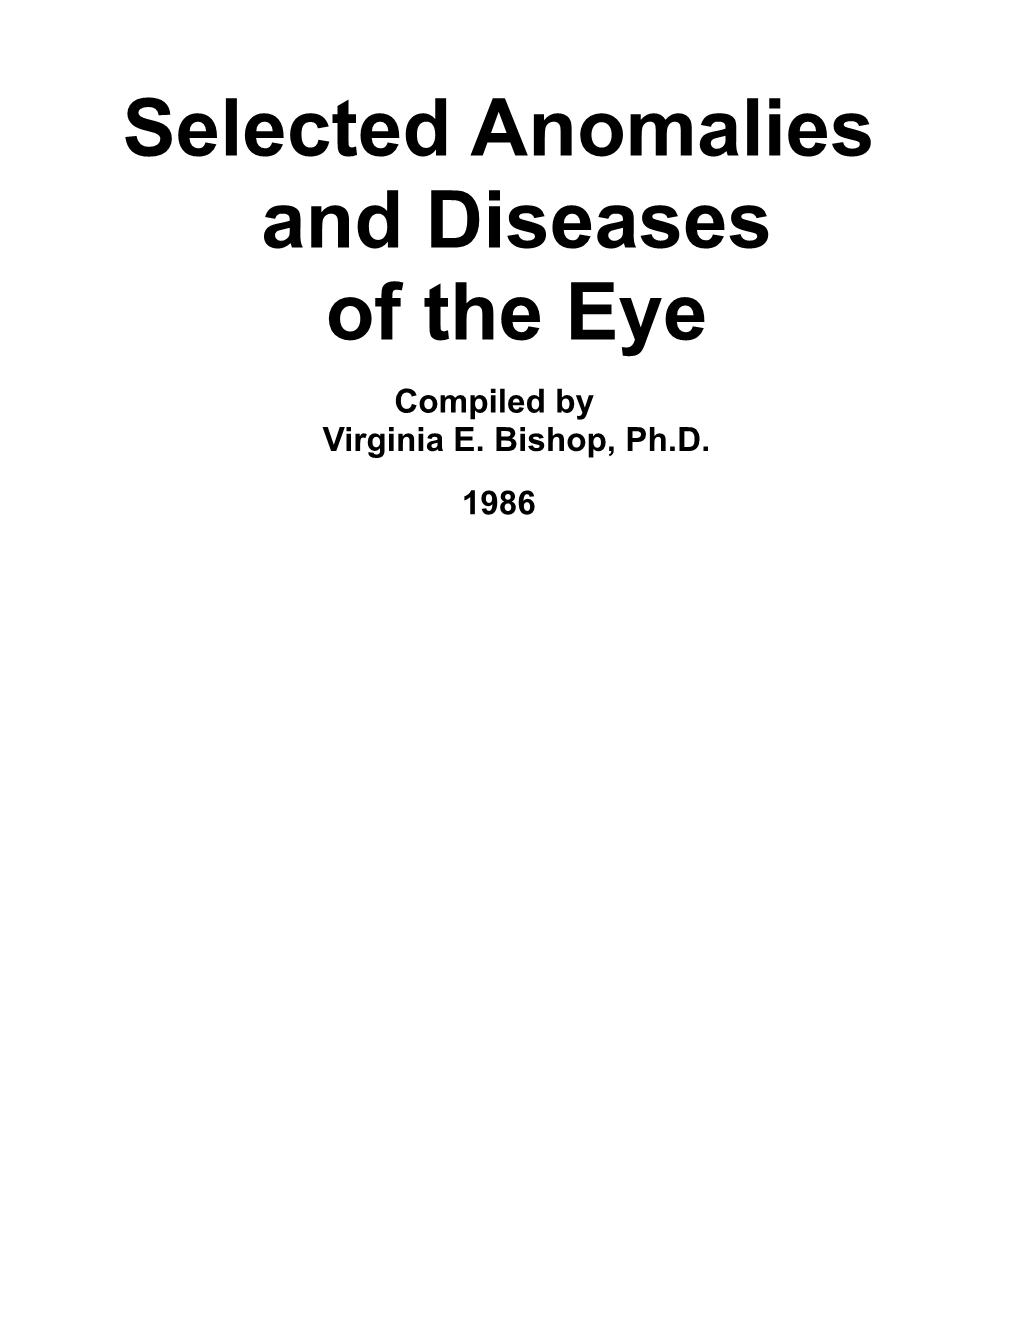 Selected Anomalies And Diseases Of The Eye